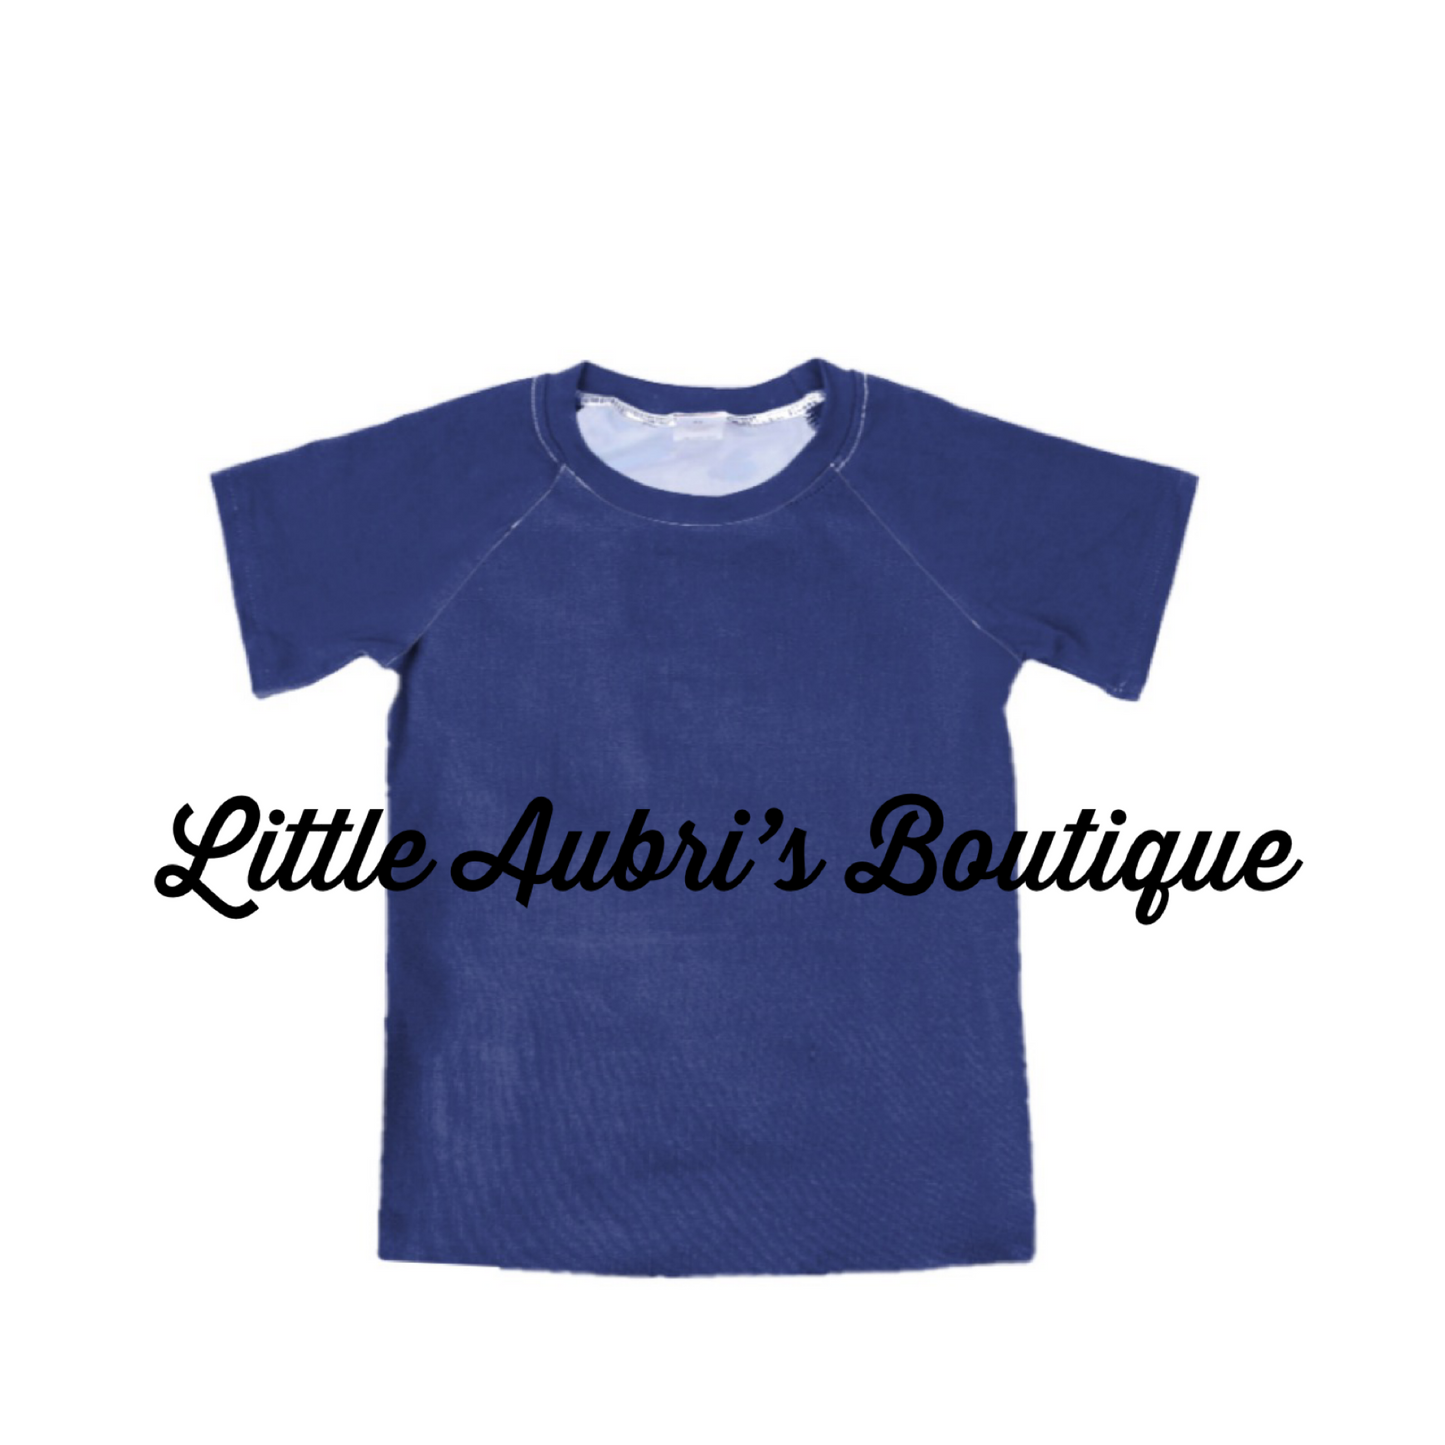 PREORDER Solid Blue Tee CLOSES 6/3